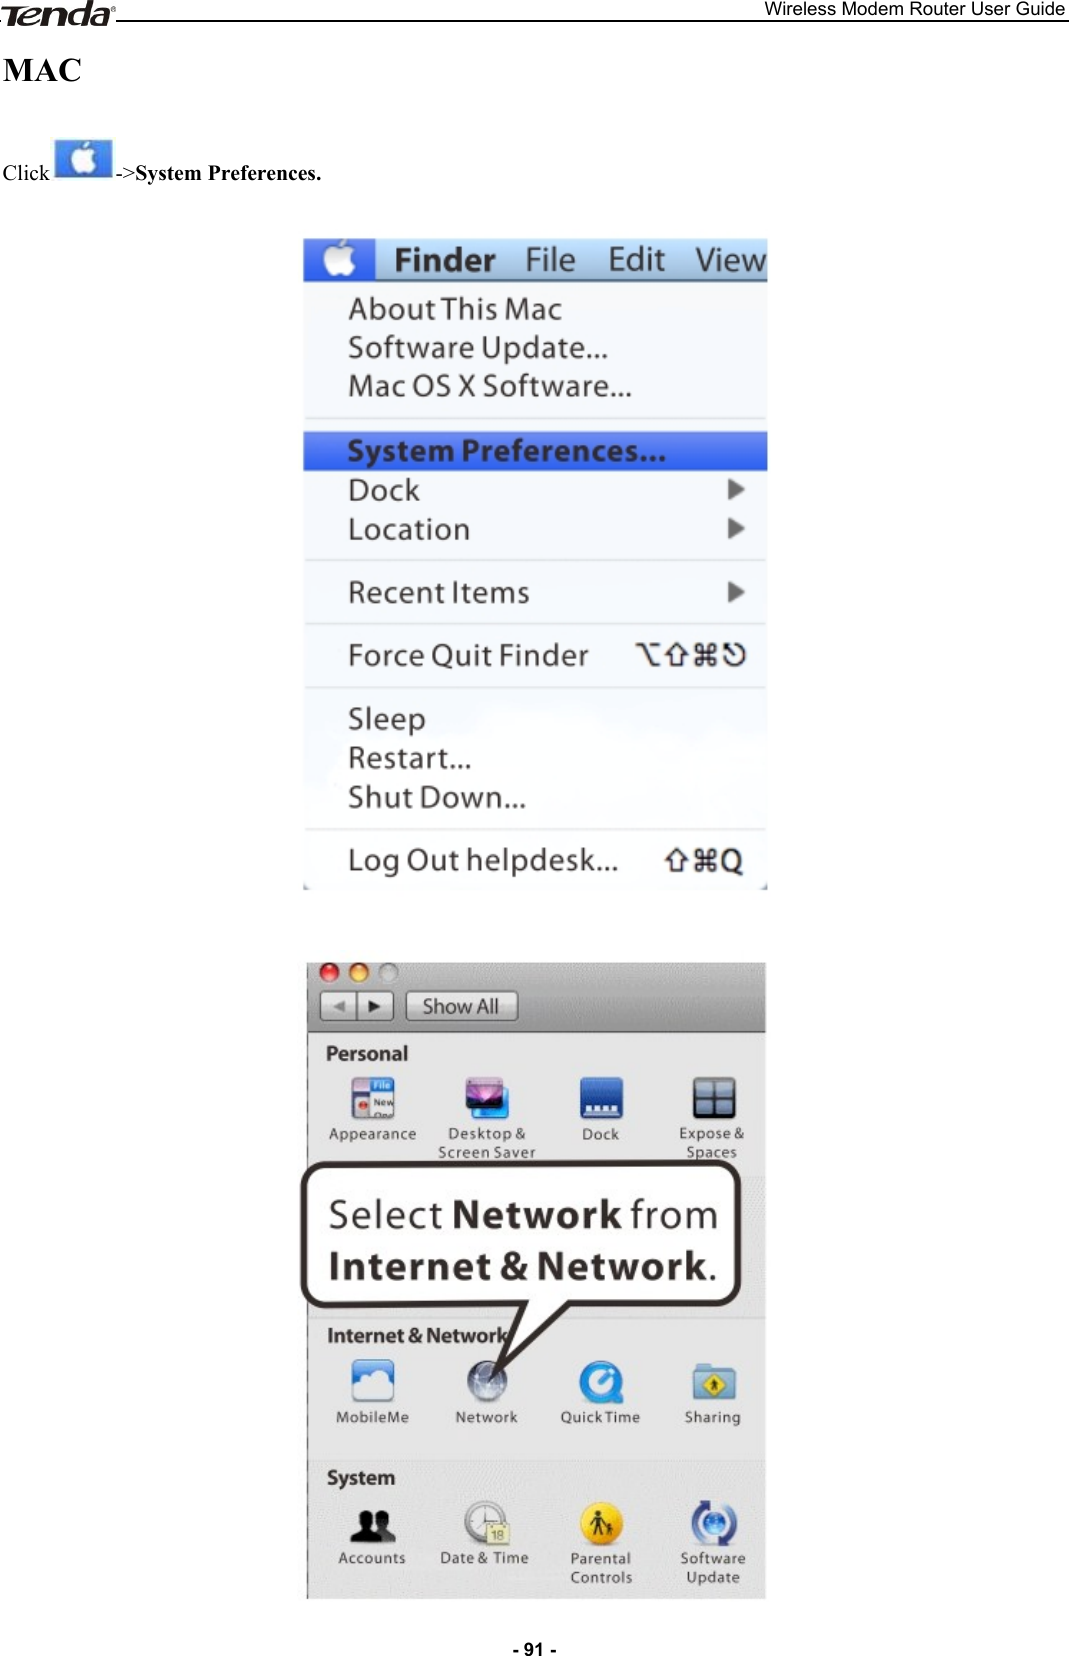 Wireless Modem Router User Guide - 91 - MAC Click -&gt;System Preferences.   